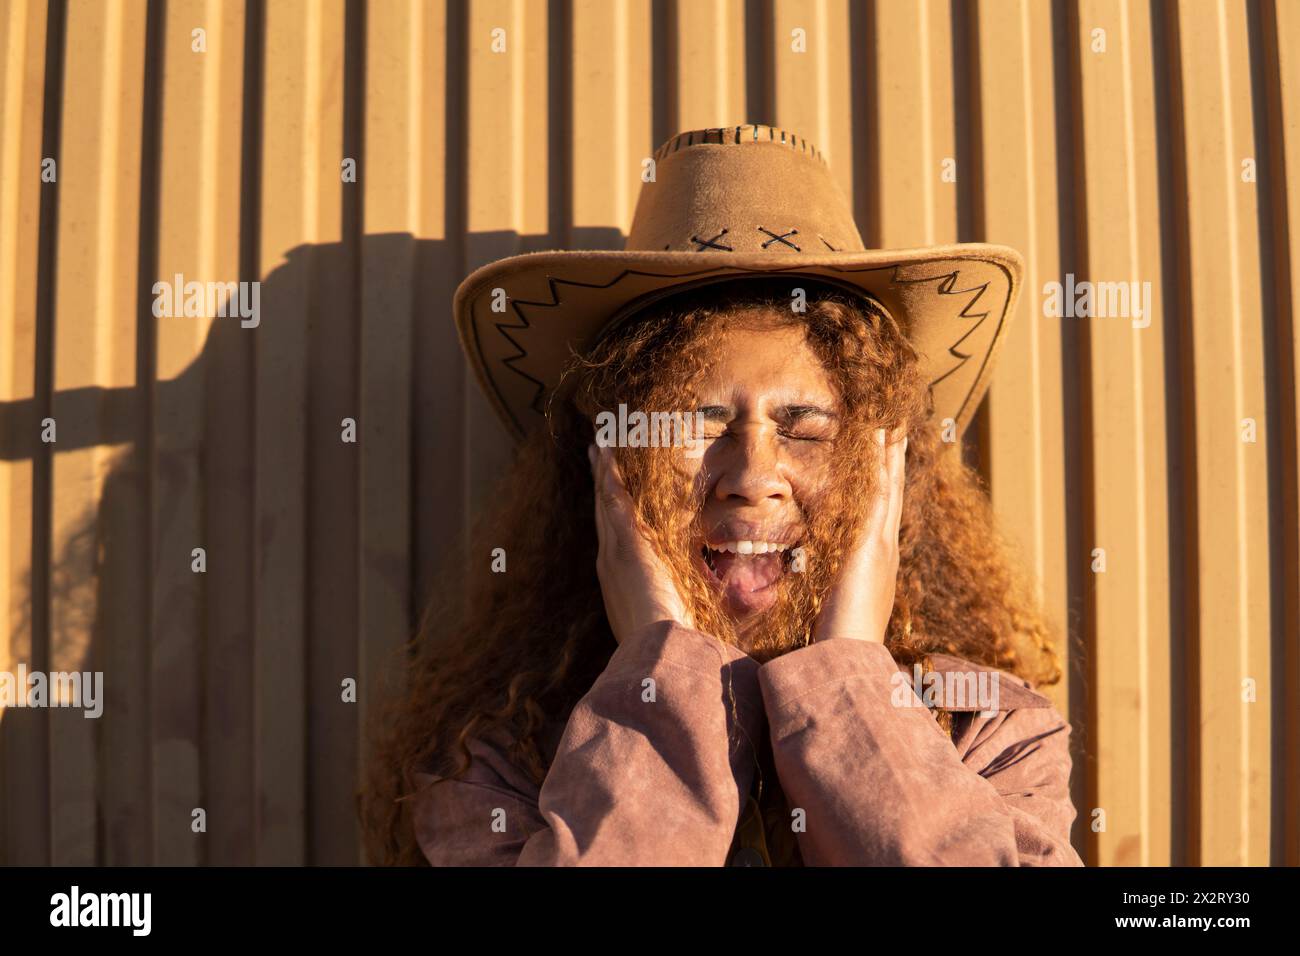 Curly haired woman wearing cowboy hat shouting in front of orange metal wall Stock Photo